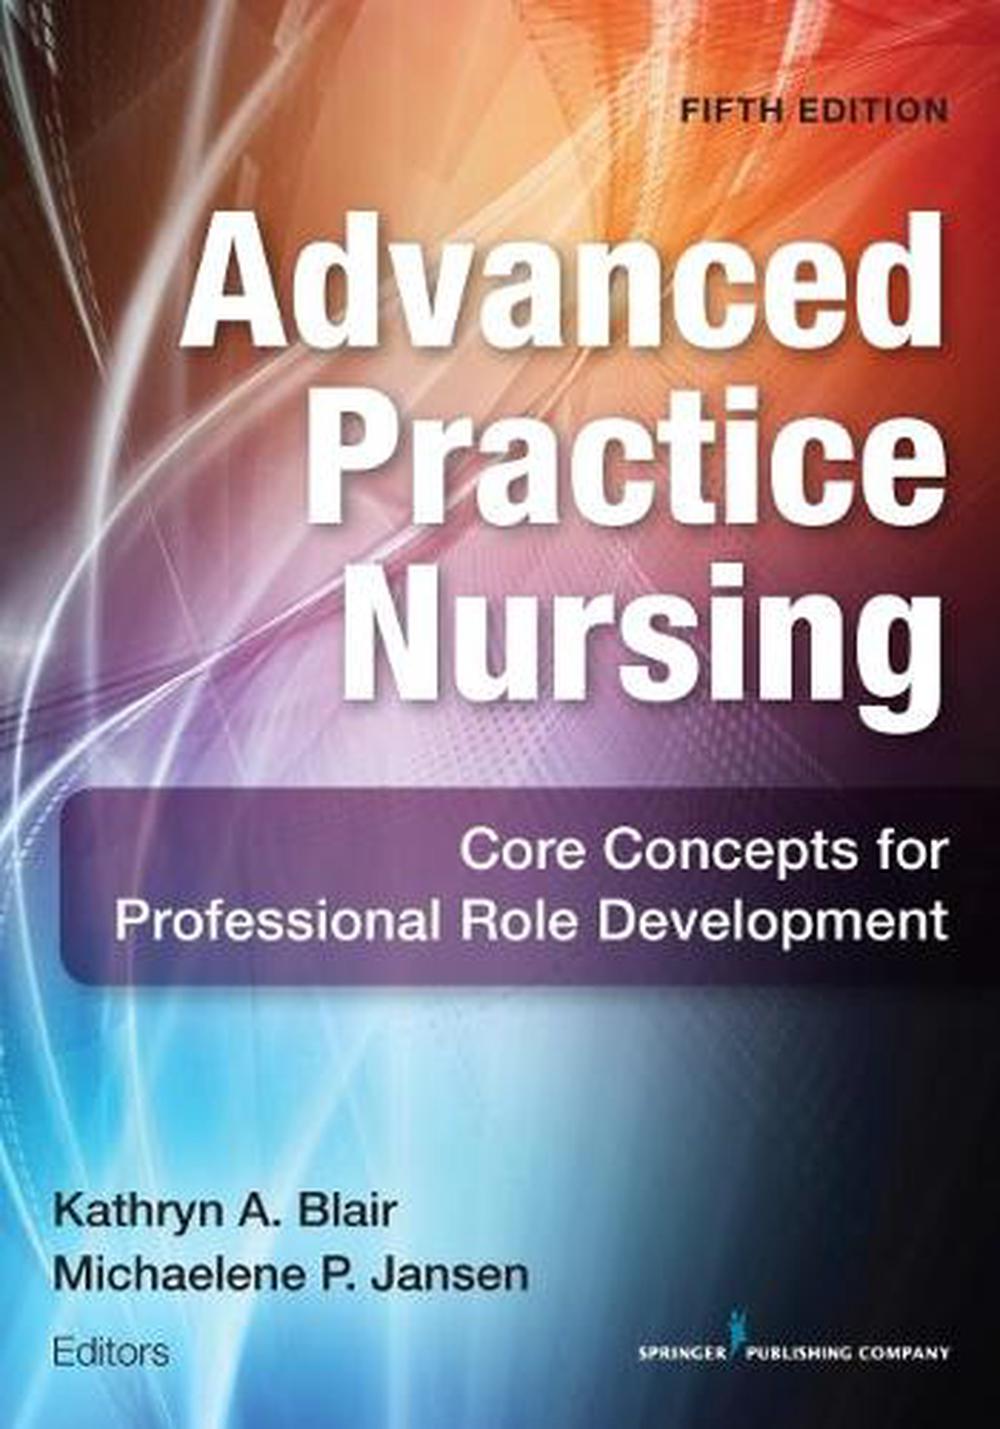 Advanced Practice Nursing, Fifth Edition: Core Concepts for ...